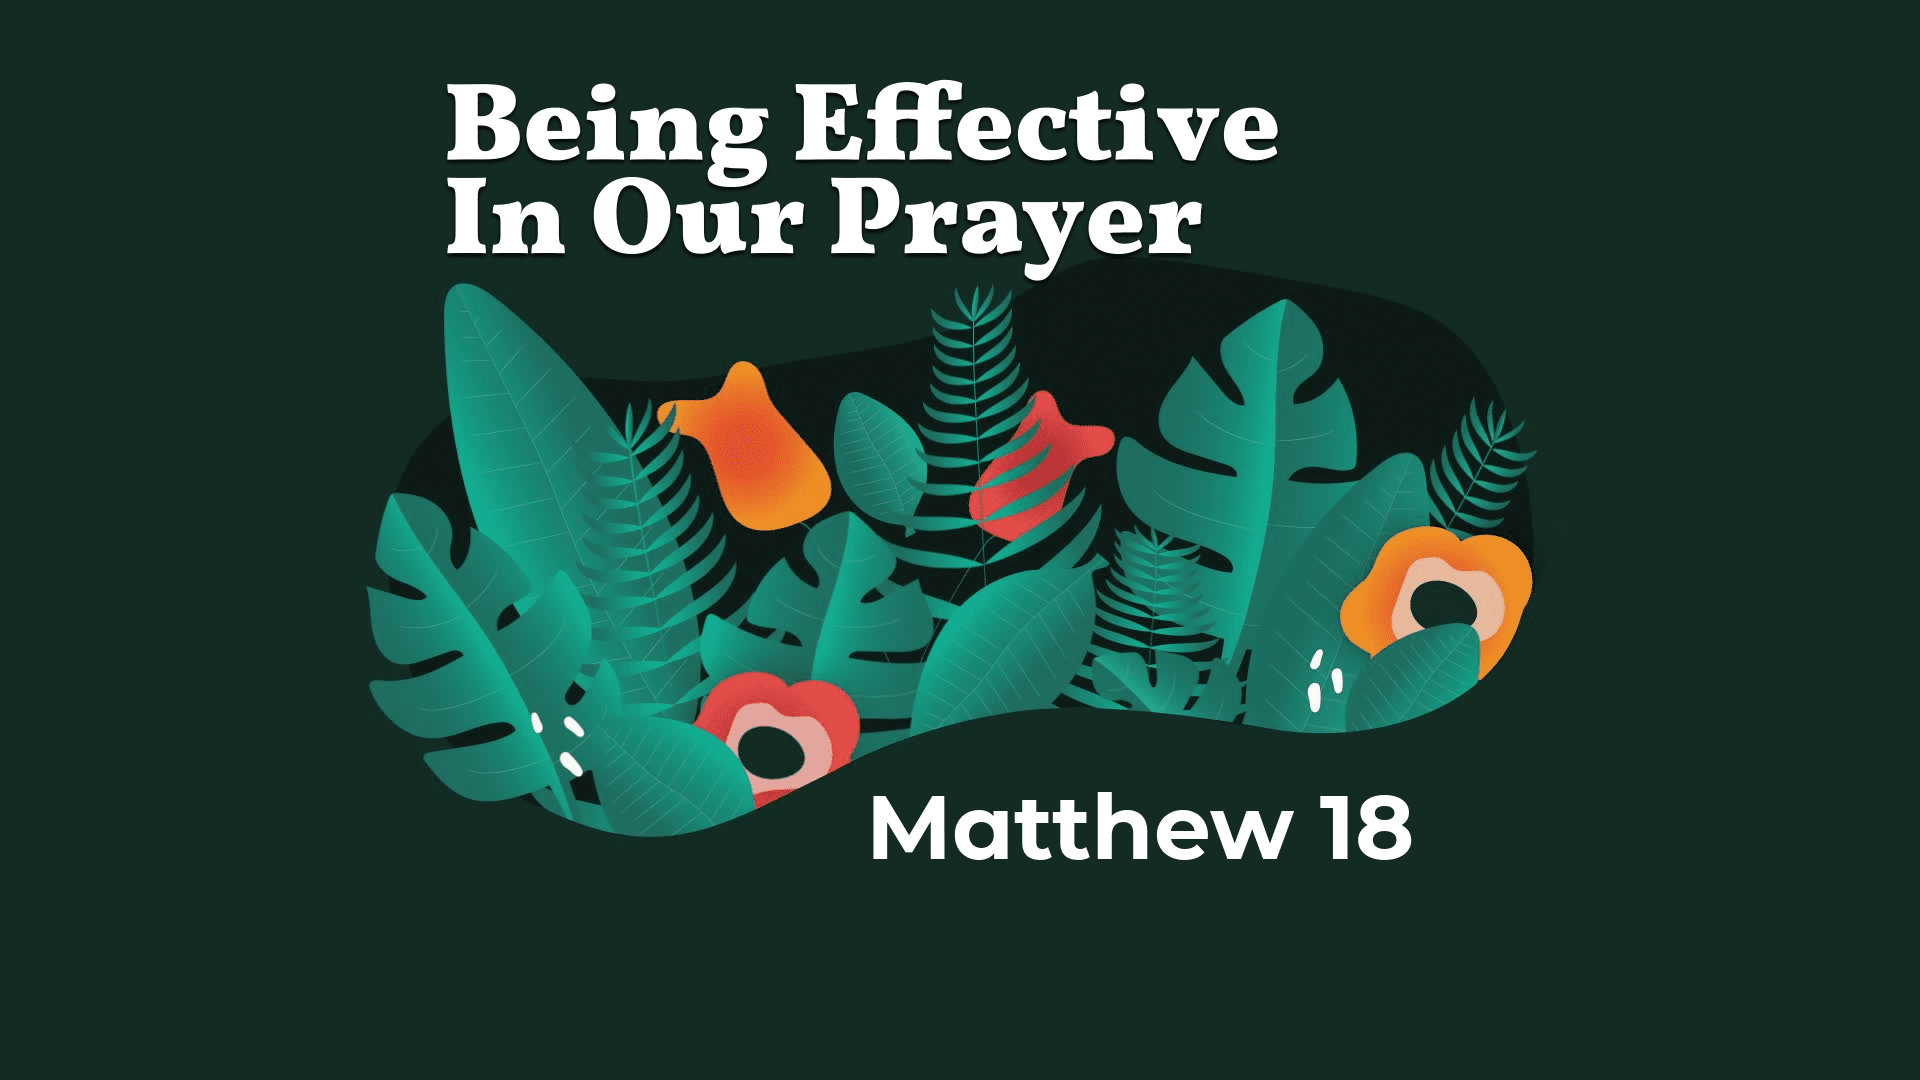 Being Effective In Our Prayer